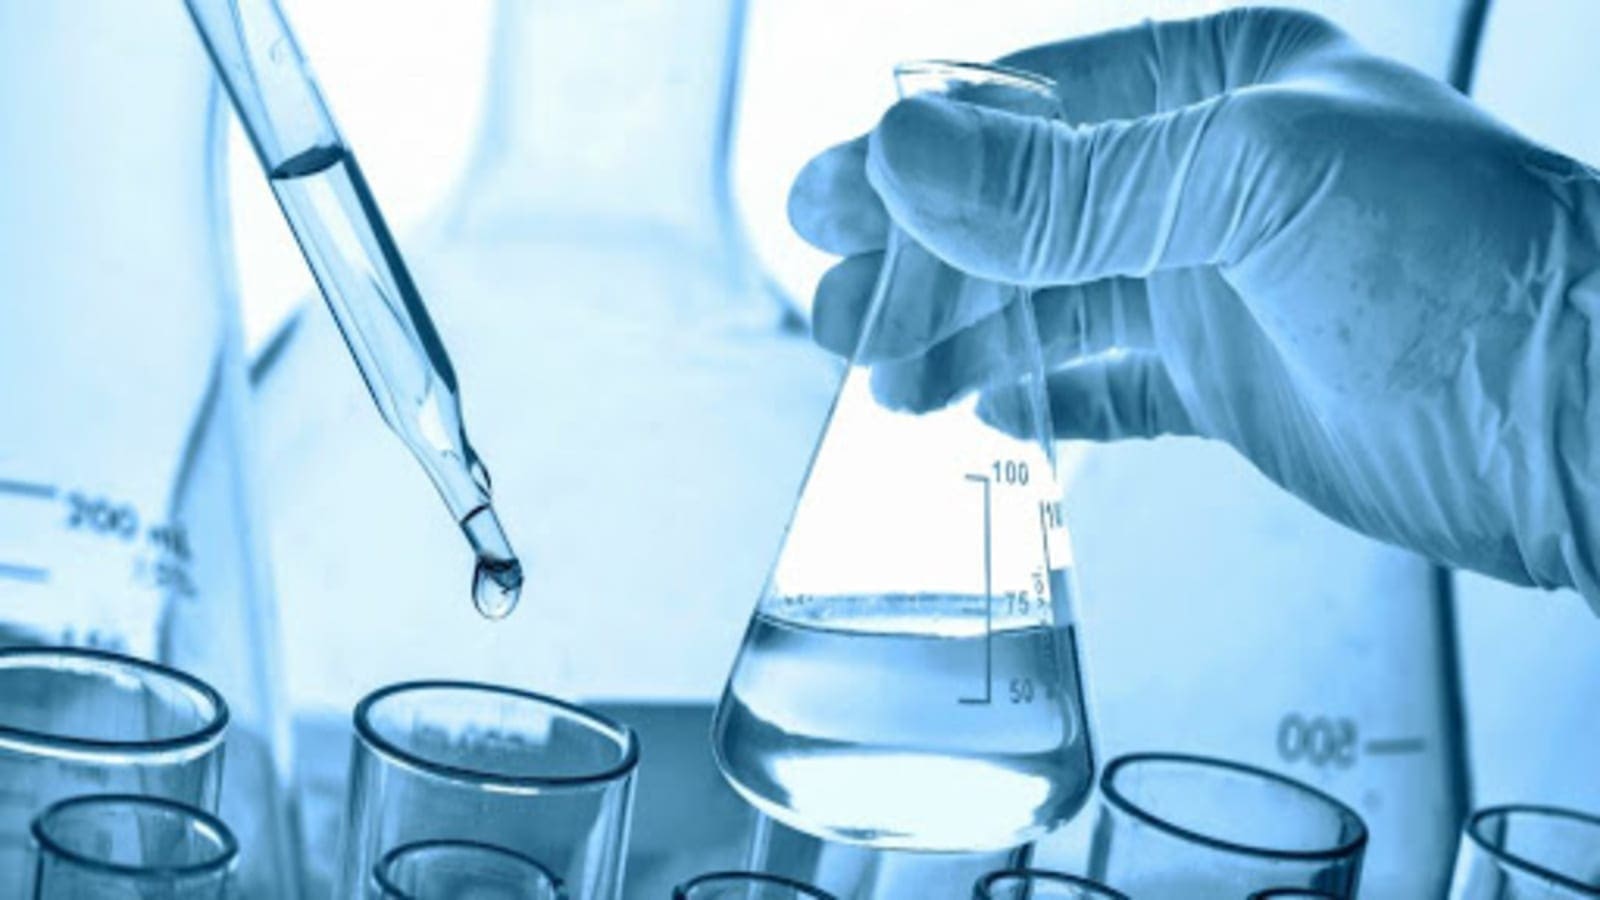 Ethiopia constructs US$3.8m specialized water testing laboratory to ensure safety of consumers